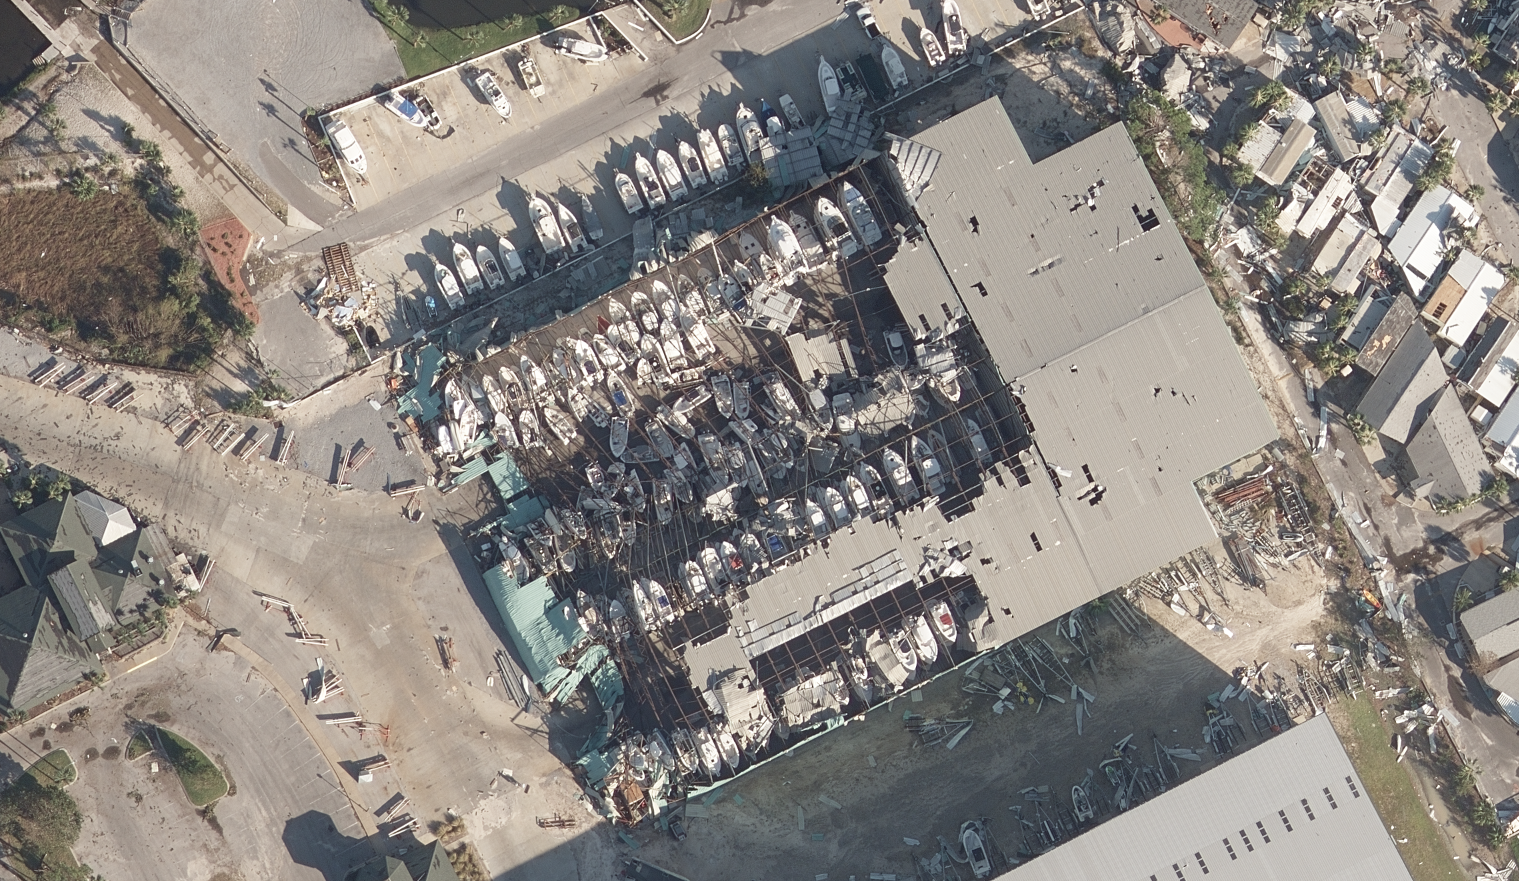 GIC ultra-high resolution vertical imagery reveals severe damage to ships and ship storage buildings in Panama City Beach, Fla. following Hurricane Michael.